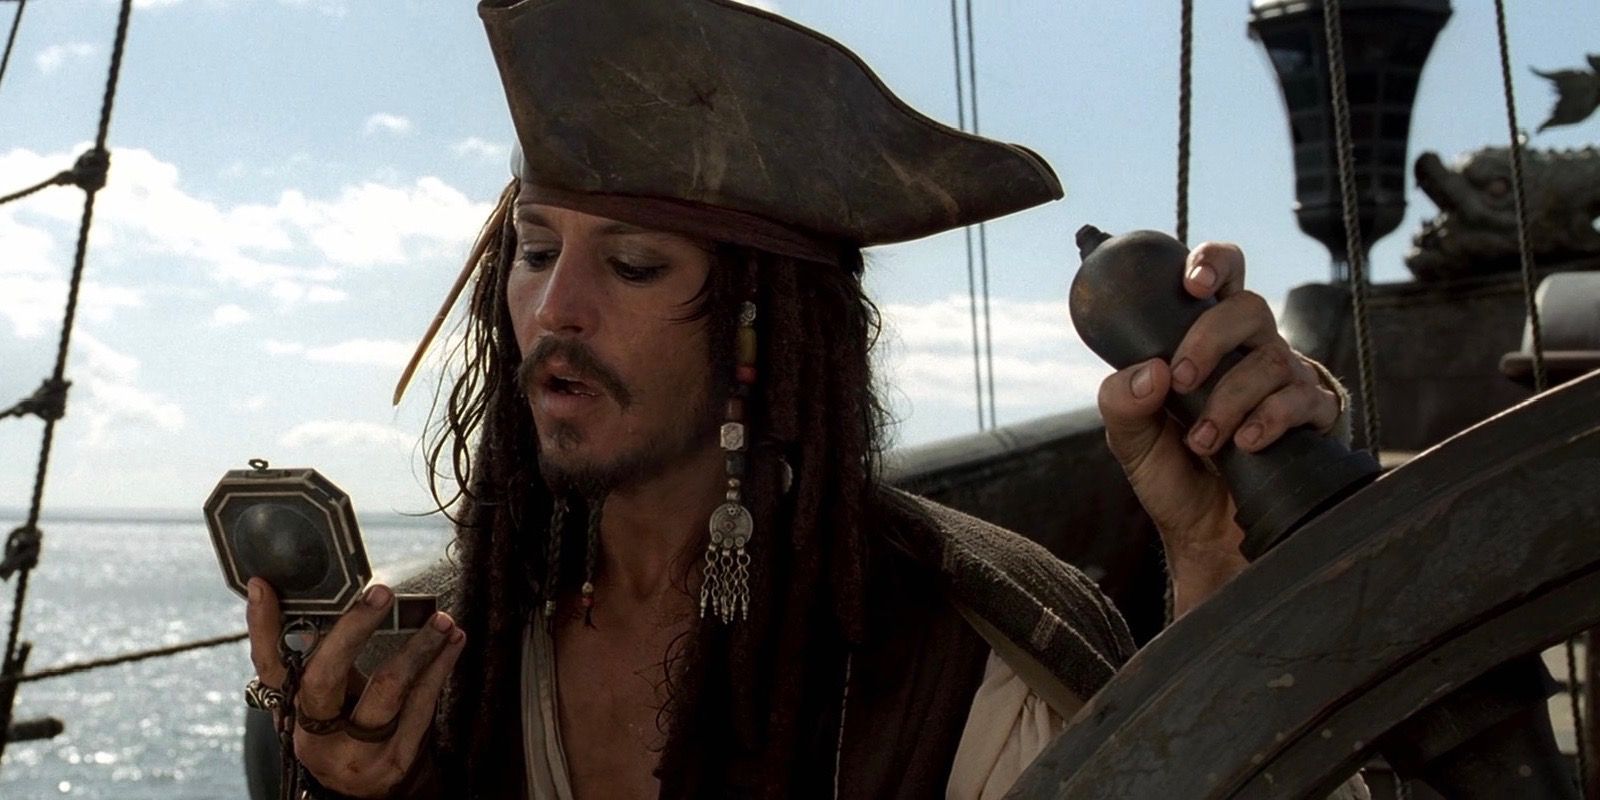 Jack Sparrow looks at his compass